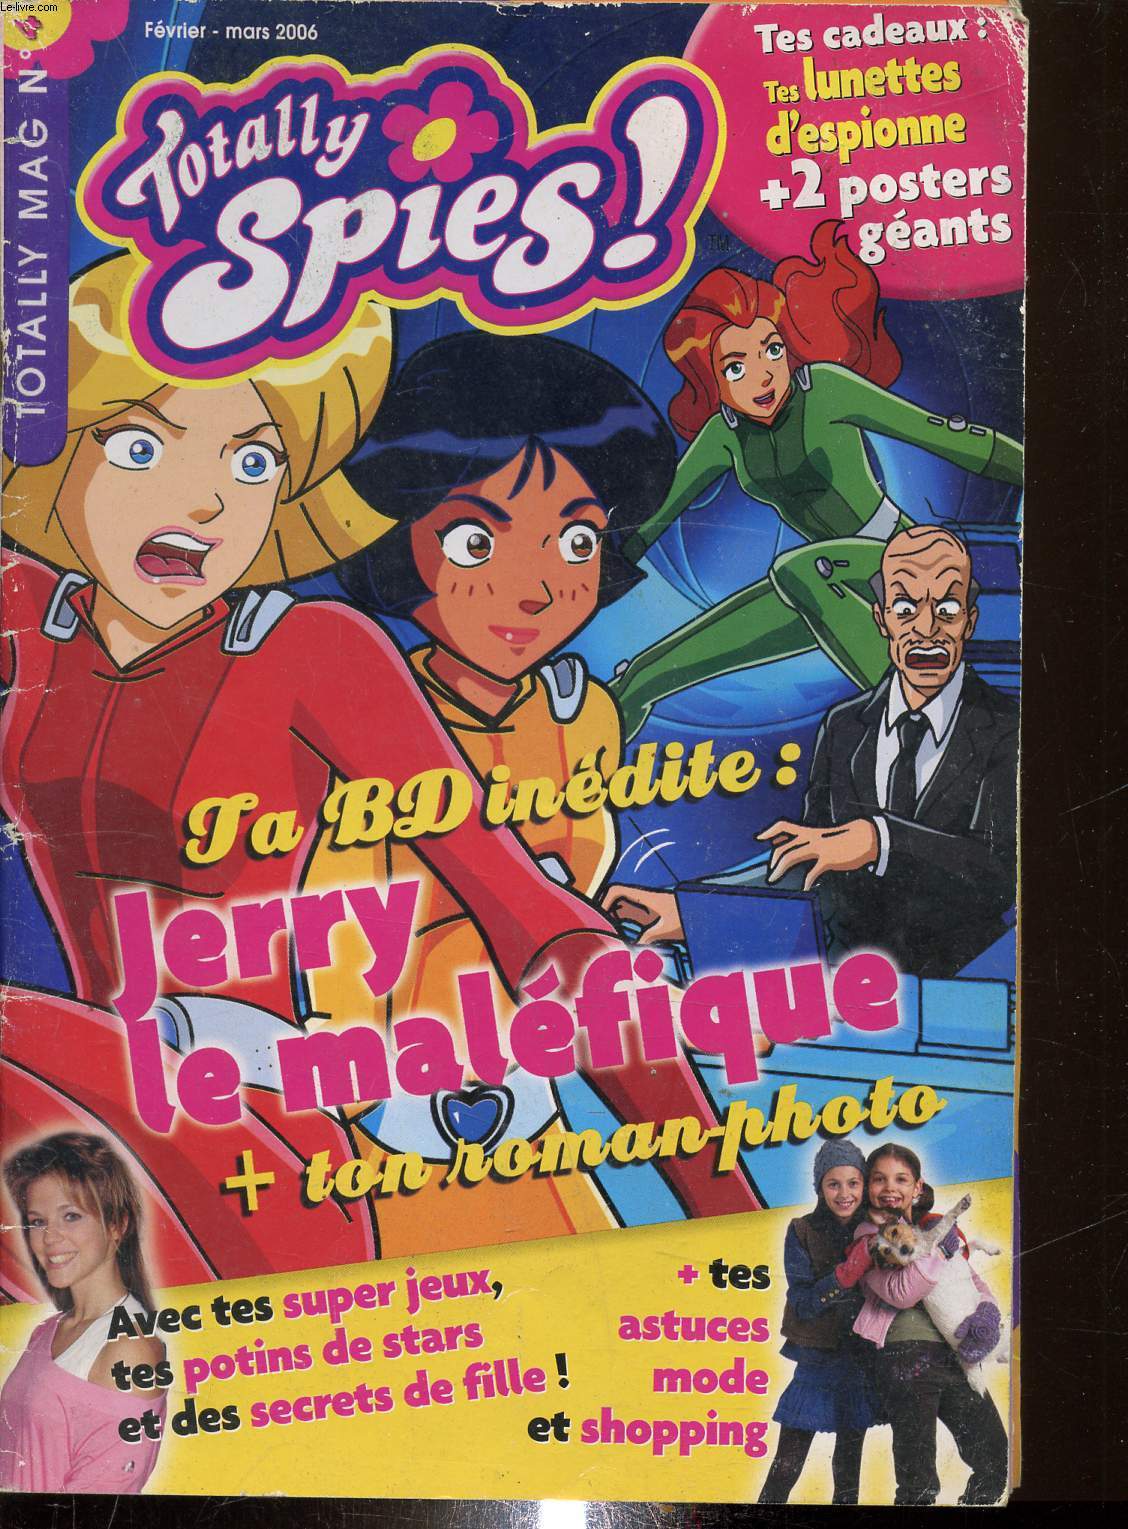 Totally Spies - Totally mag n4 - Jerry le malfique